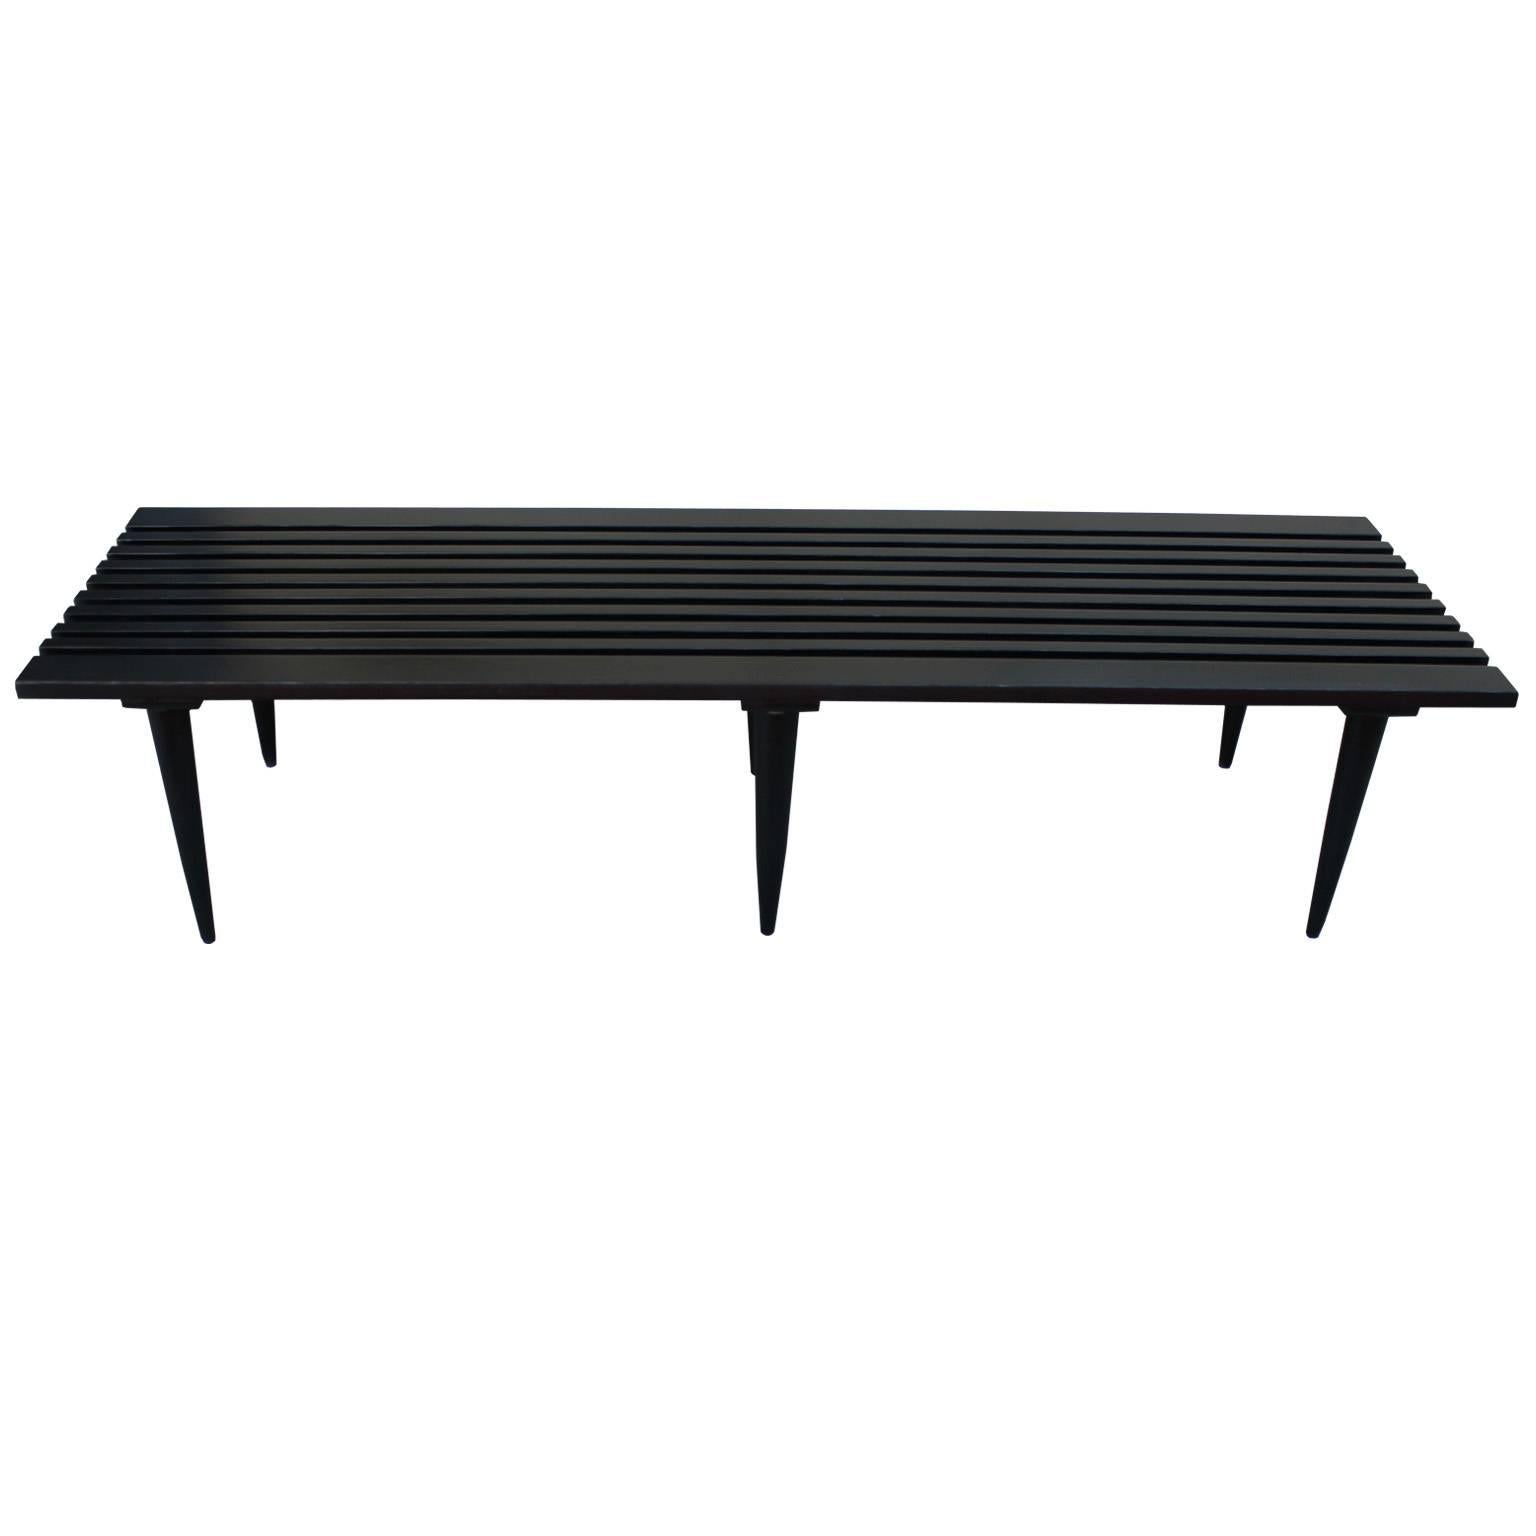 Sleek six legged bench or coffee table. Coffee table is finished in a satiny ebony stain. Table or bench will be perfect in a Mid-Century Modern, or transitional space.